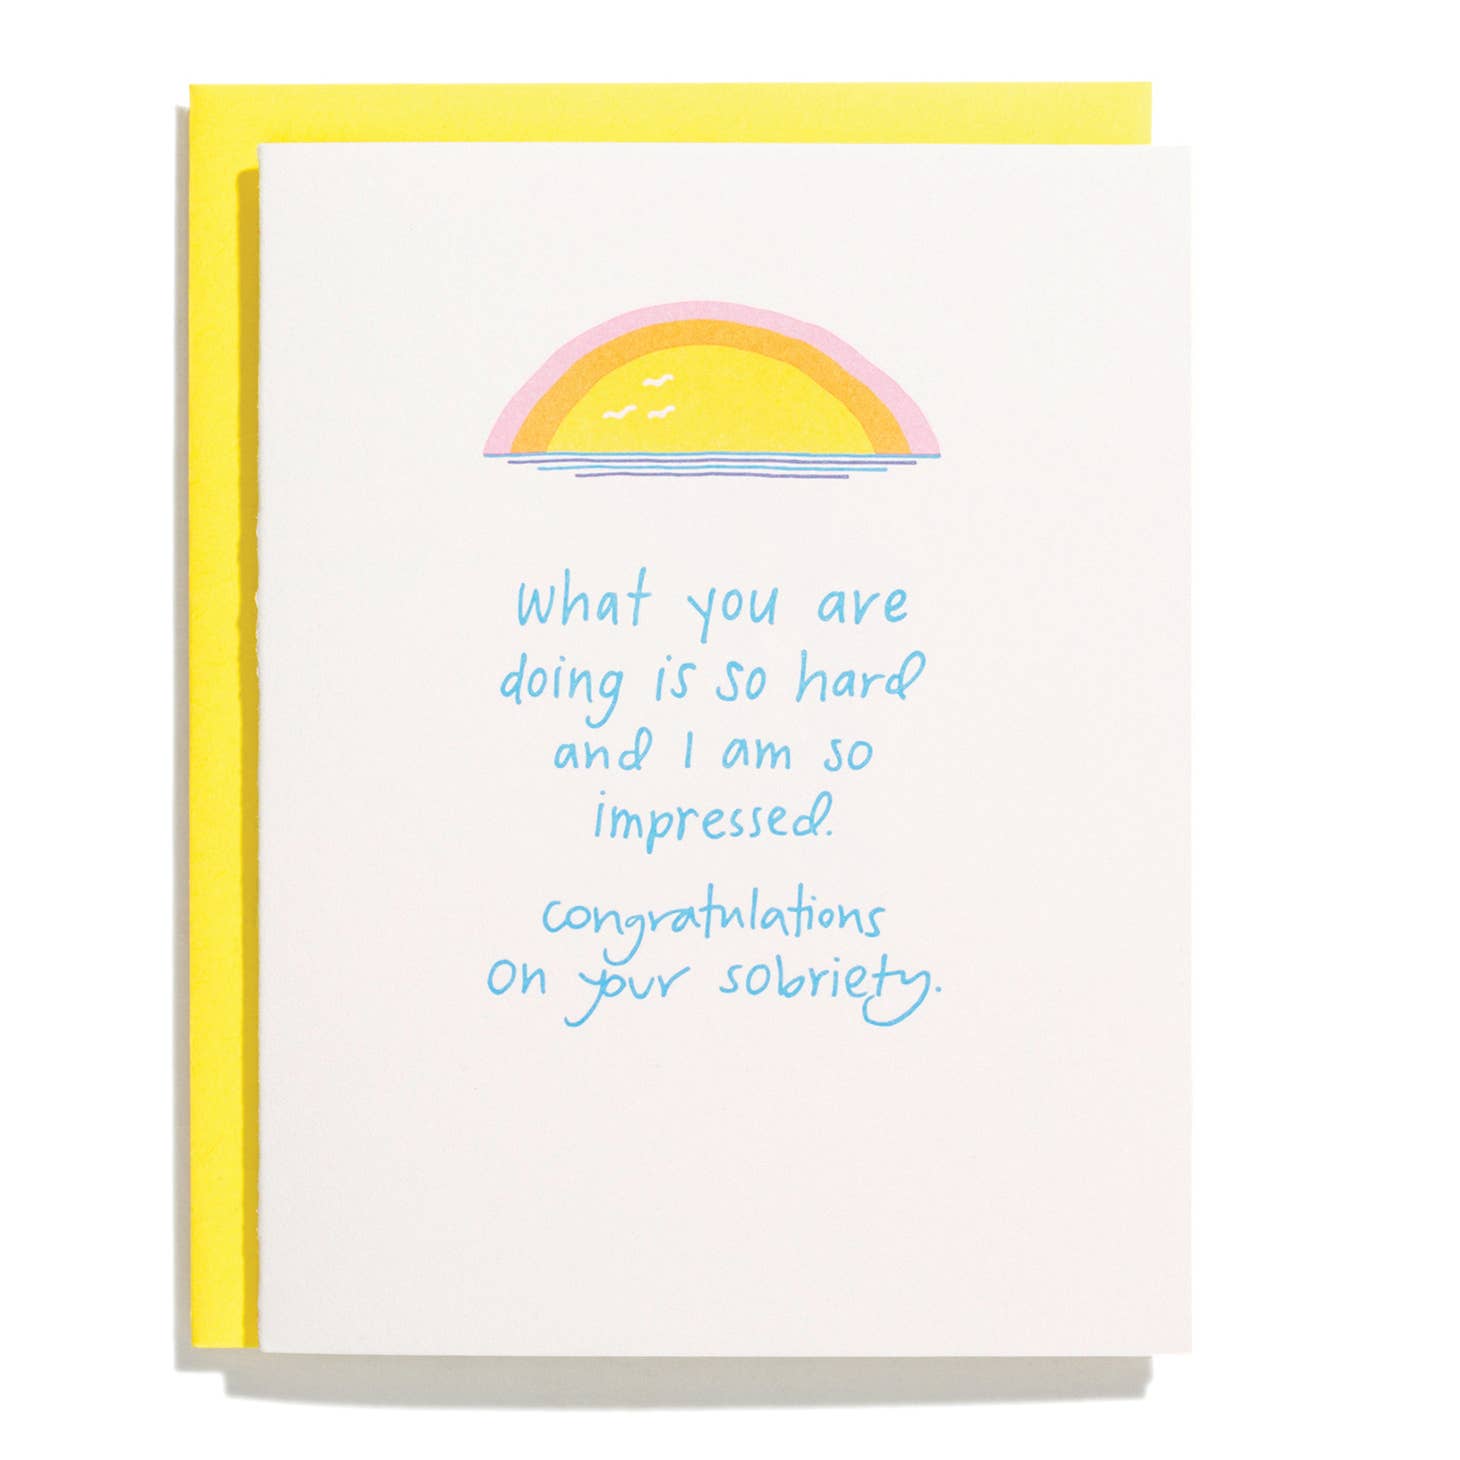 Light pink card with blue text saying, “What you are doing is so hard and I am so impressed. Congratulations on your sobriety.” Images of a yellow, orange and pink sunset over blue water at top of card. A yellow envelope is included.